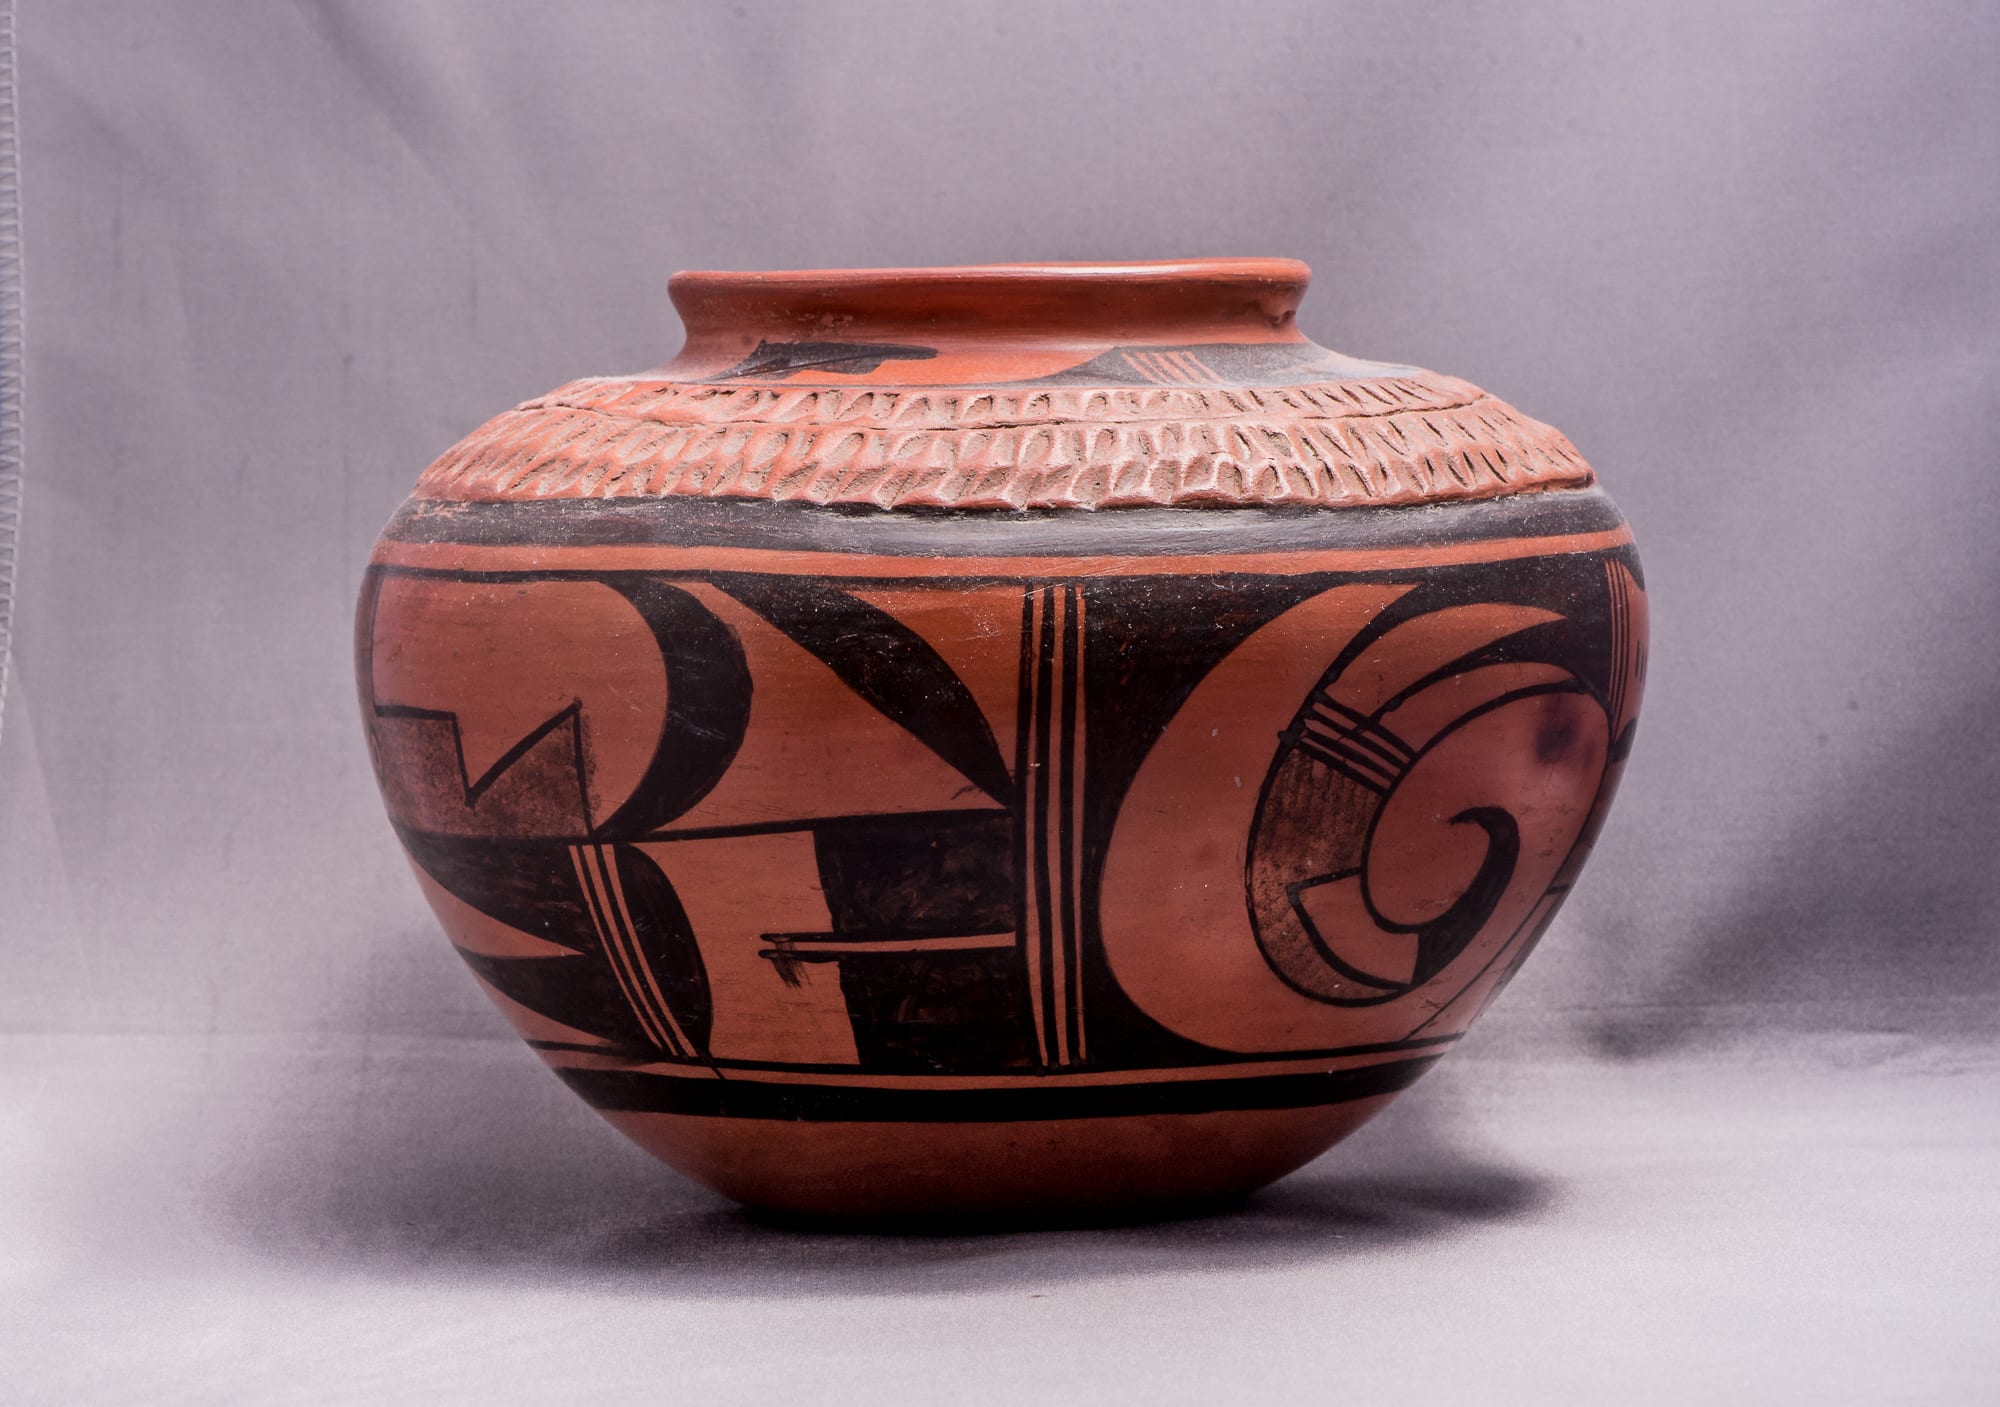 2014-03 Corrugated Redware Jar with Parrot Designs